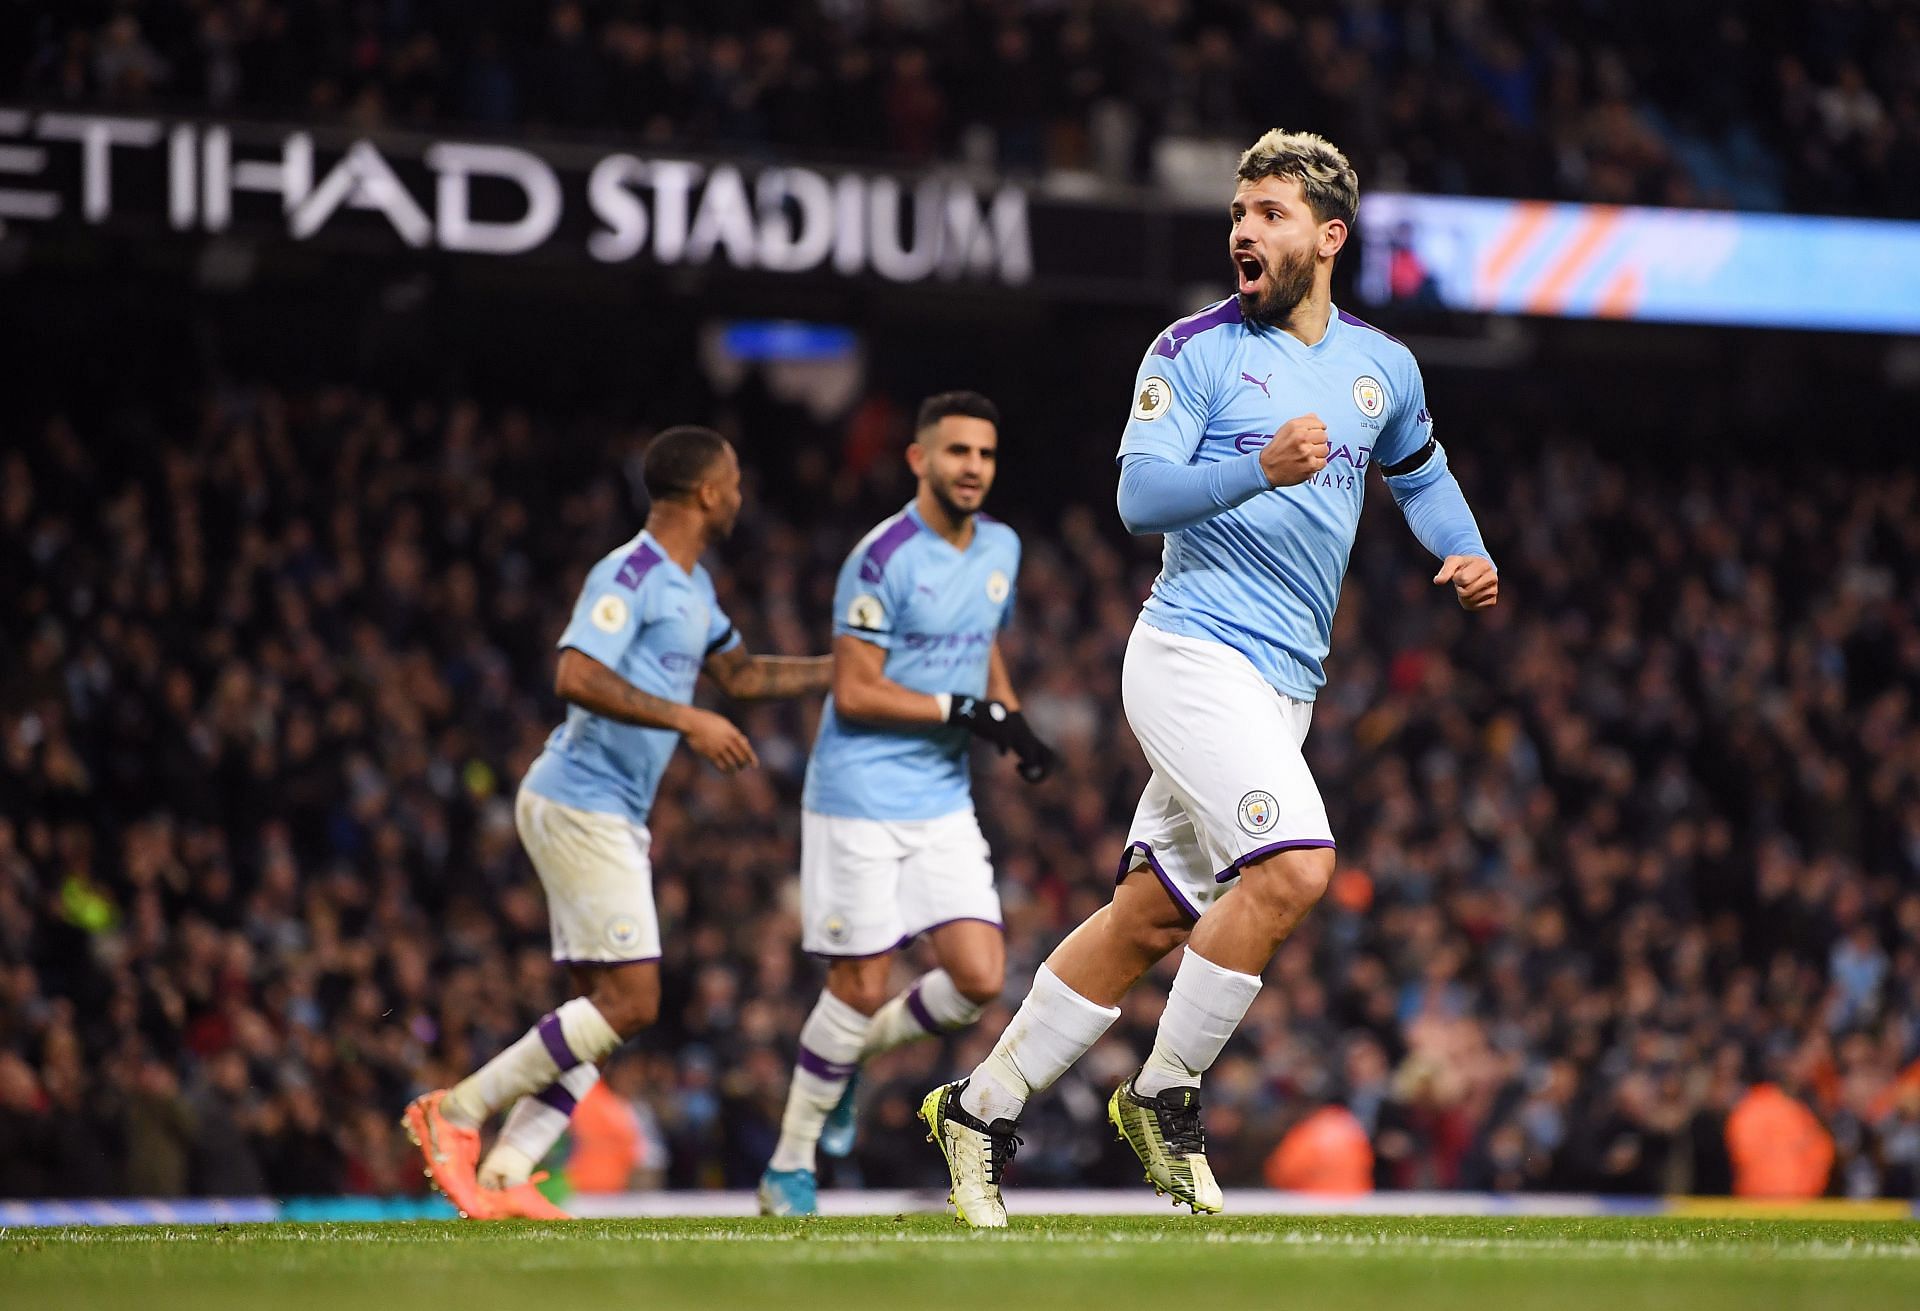 Manchester City were on fire in the 2019-20 season